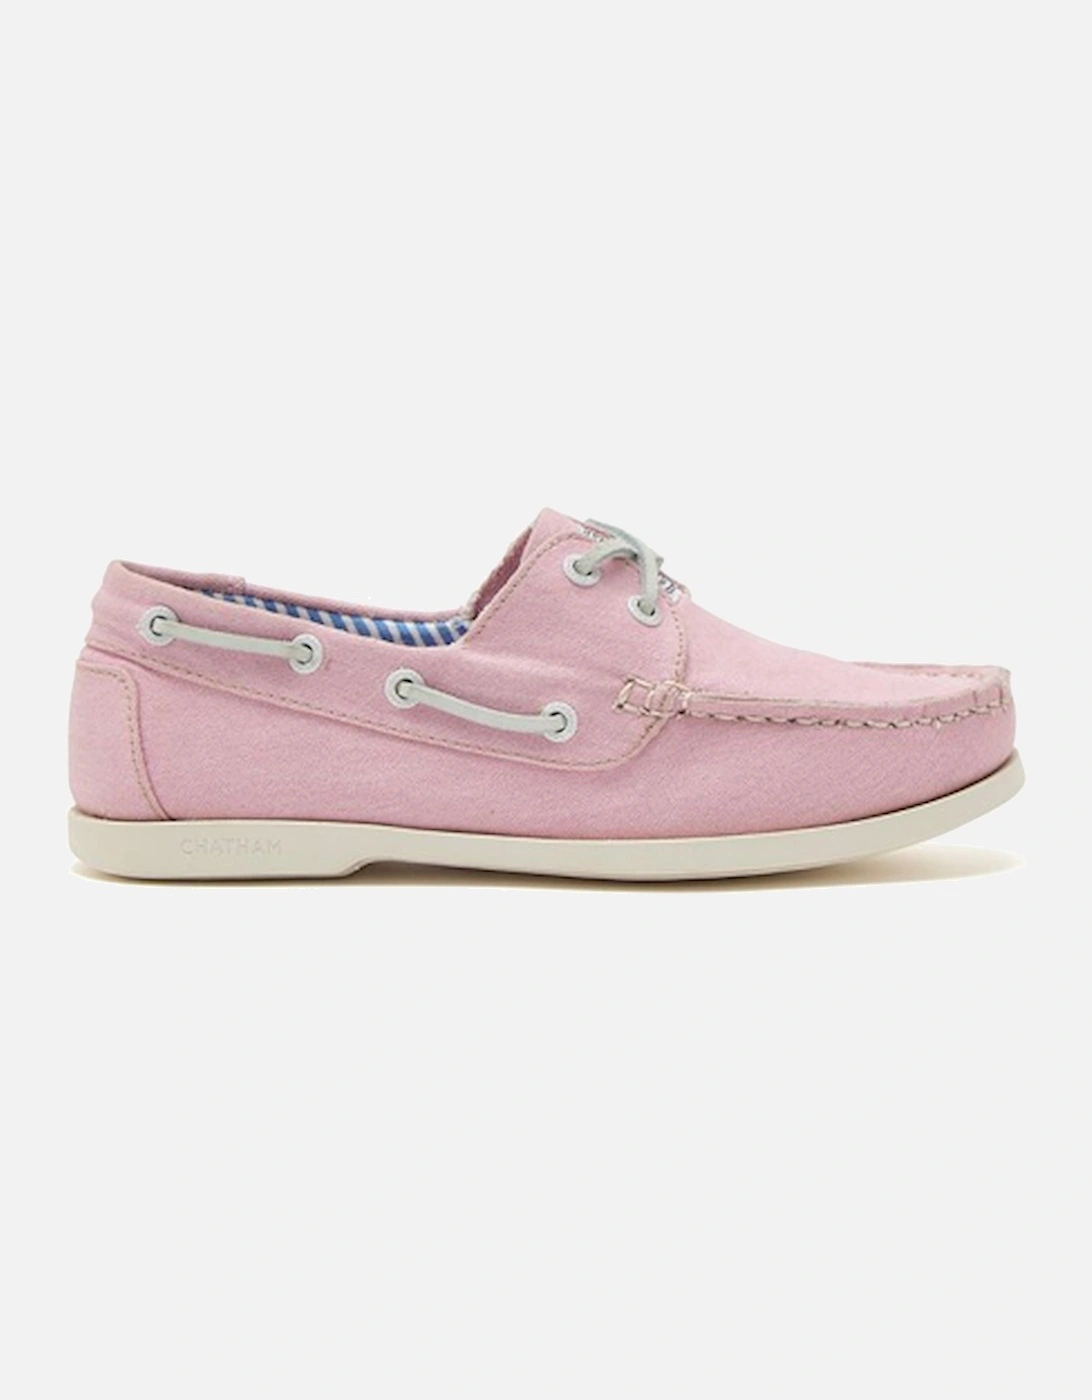 X Joules Women's Jetty Lady Canvas Boat Shoes Pink, 6 of 5